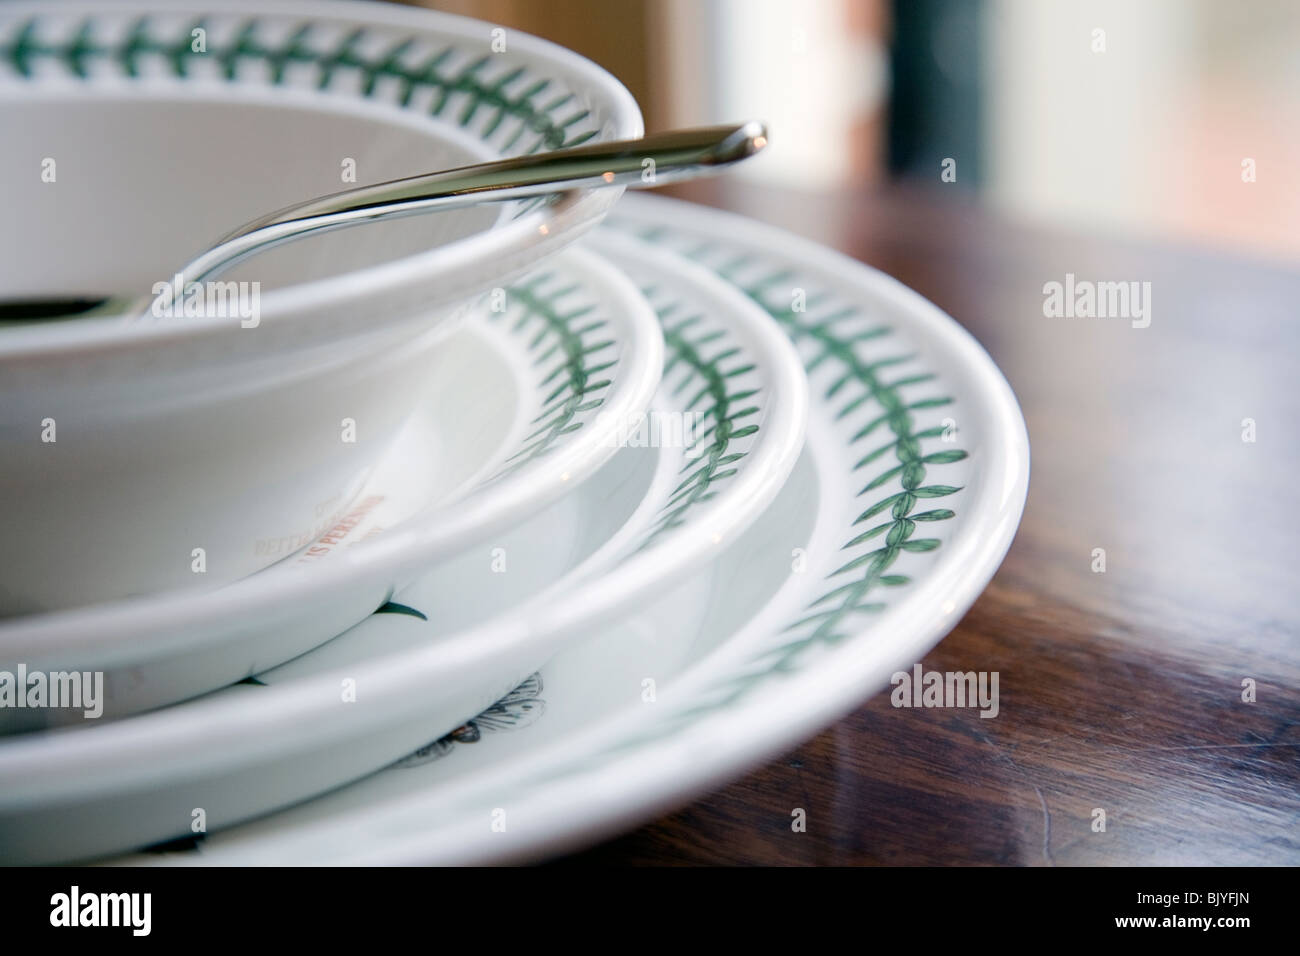 china dishes stacked on wooden table with spoon in bowl Stock Photo